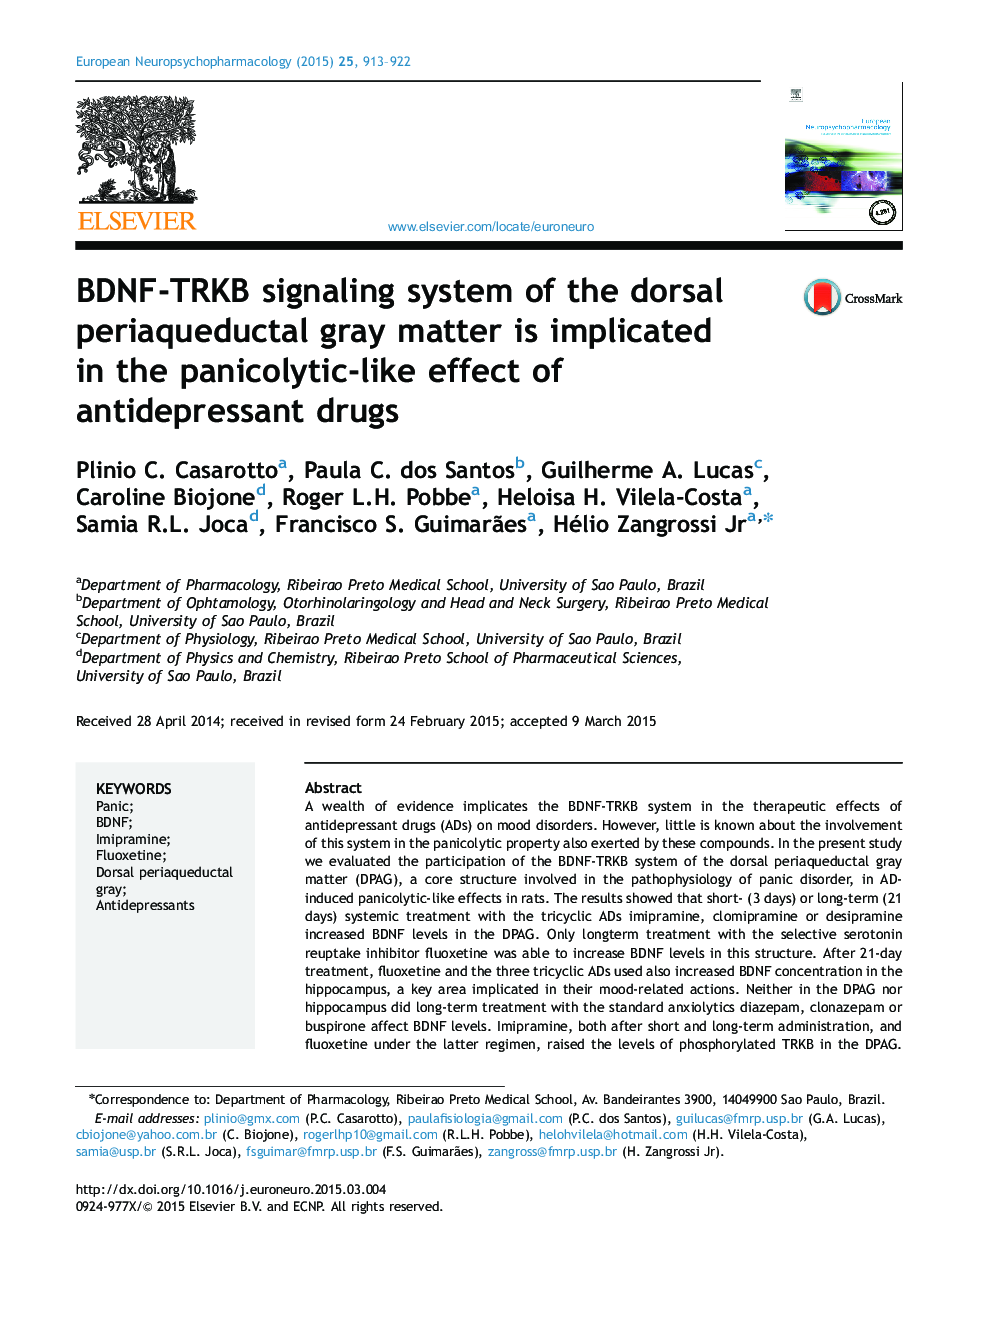 BDNF-TRKB signaling system of the dorsal periaqueductal gray matter is implicated in the panicolytic-like effect of antidepressant drugs